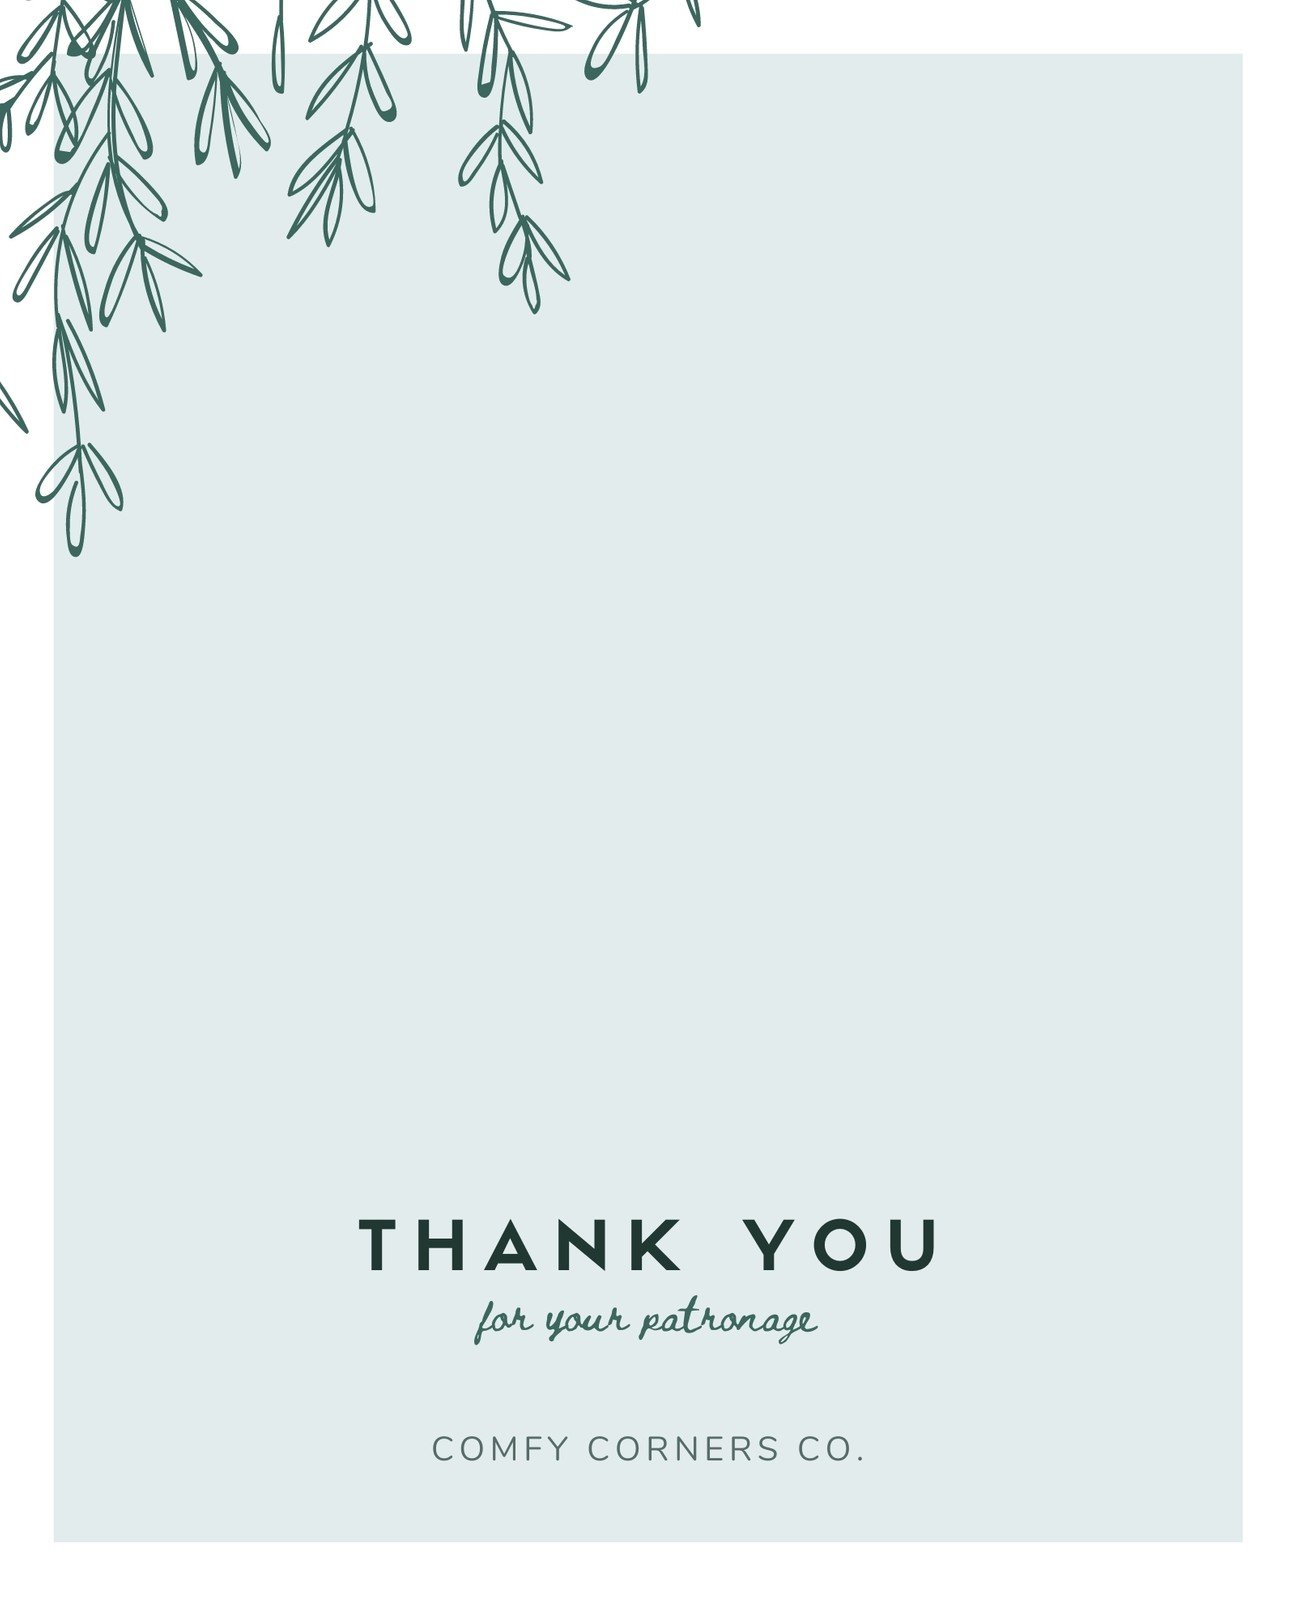 Green Vines Business Thank You Note Card - Templates by Canva For Thank You Note Cards Template